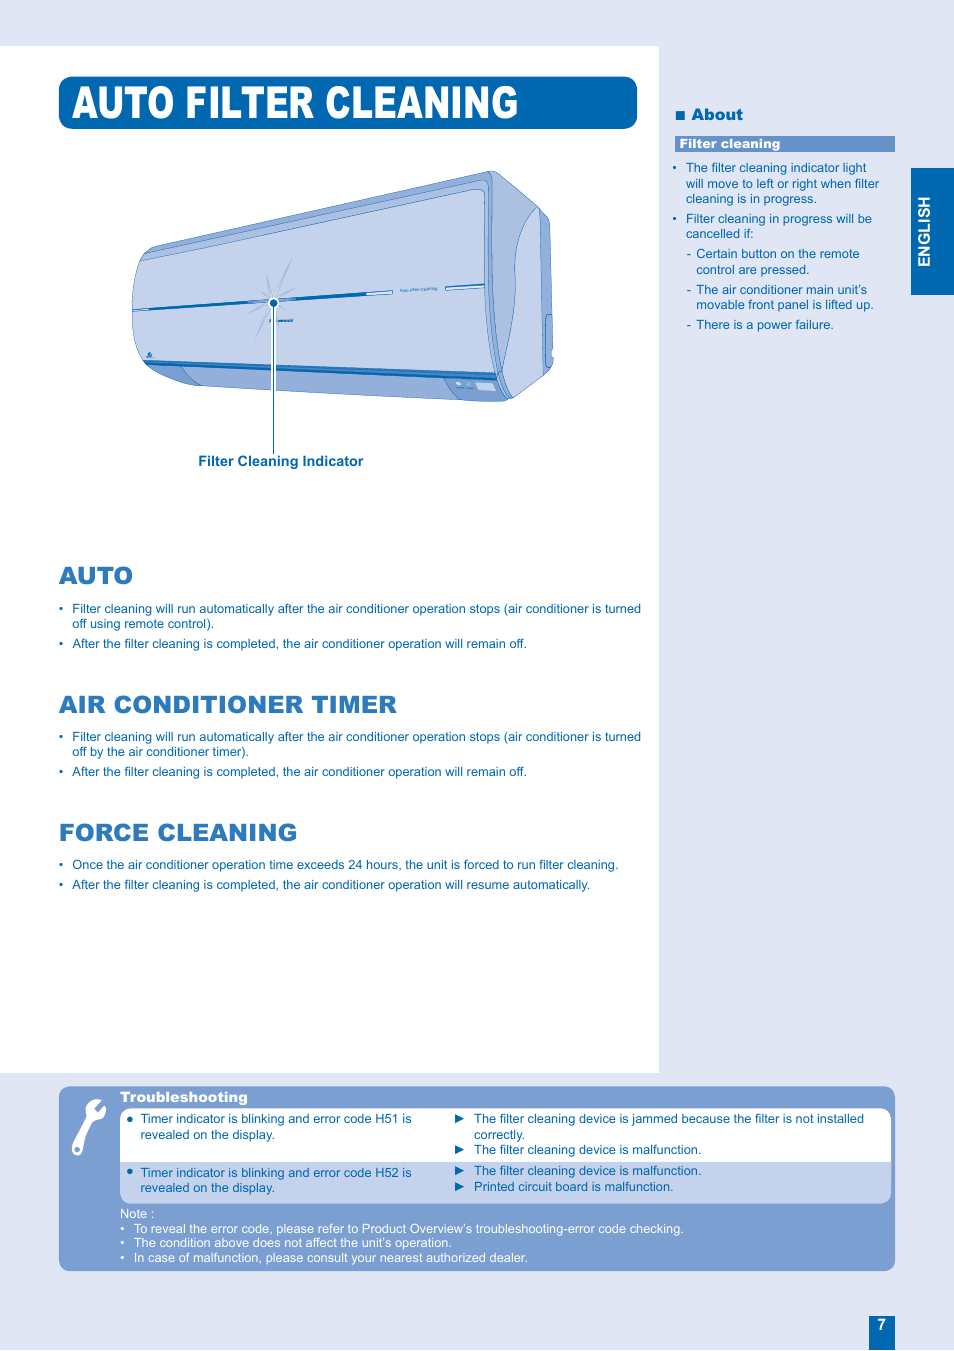 Auto filter cleaning, Auto, Air conditioner timer | Panasonic CS-XE12EKE  User Manual | Page 7 / 20